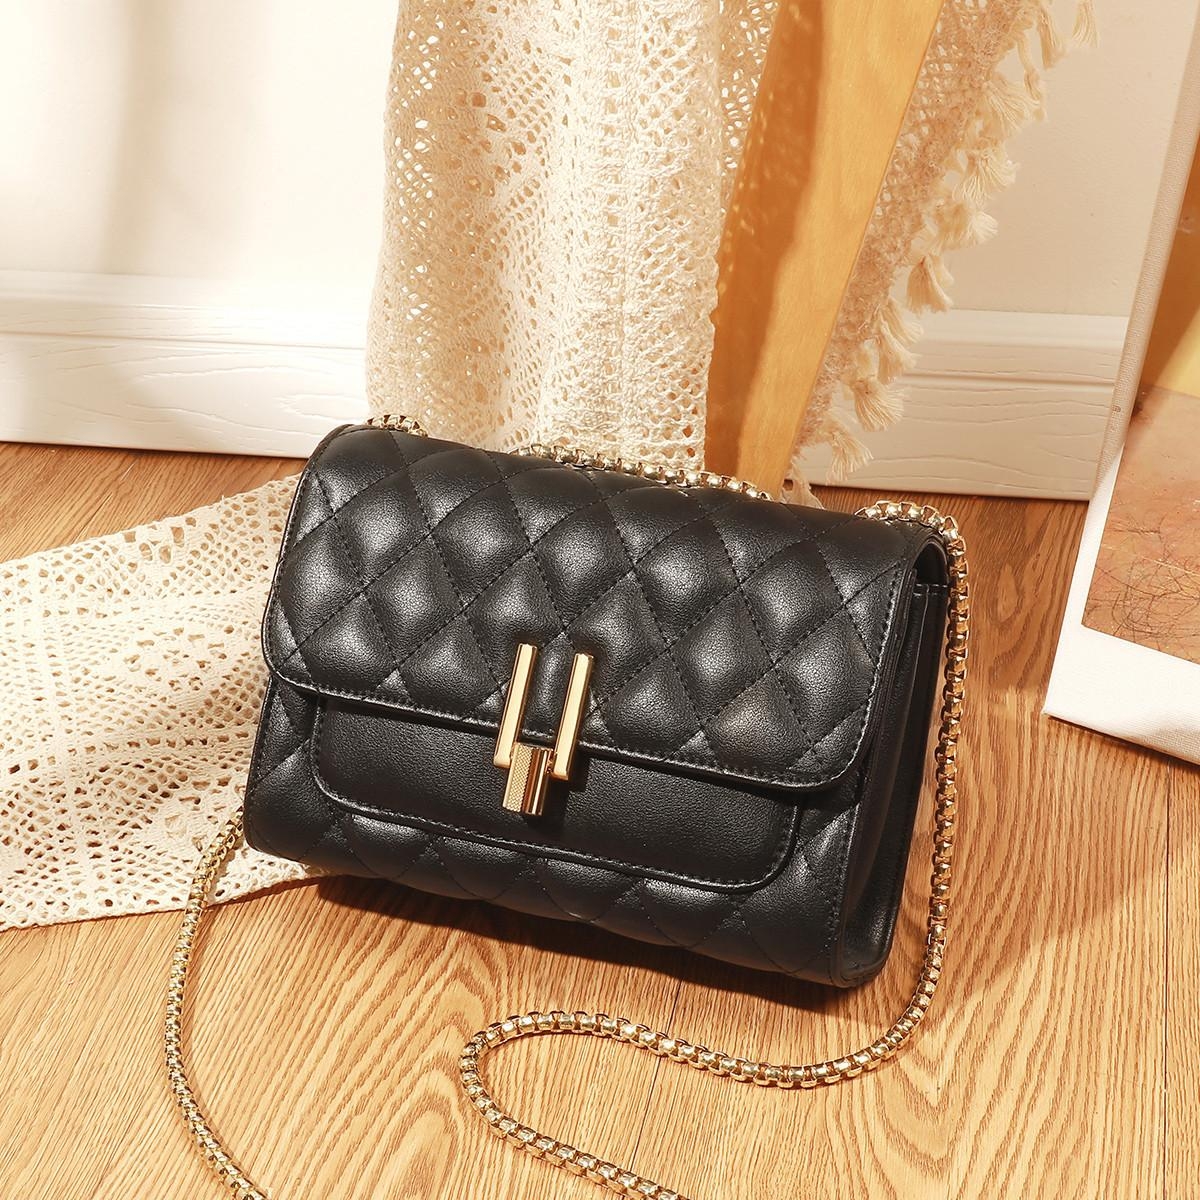 Crossbody Bags for Women Small Handbags PU Leather Shoulder Bag Ladies Purse  Evening Bag Quilted Satchels with Chain Strap,brown，G168664 - Walmart.com